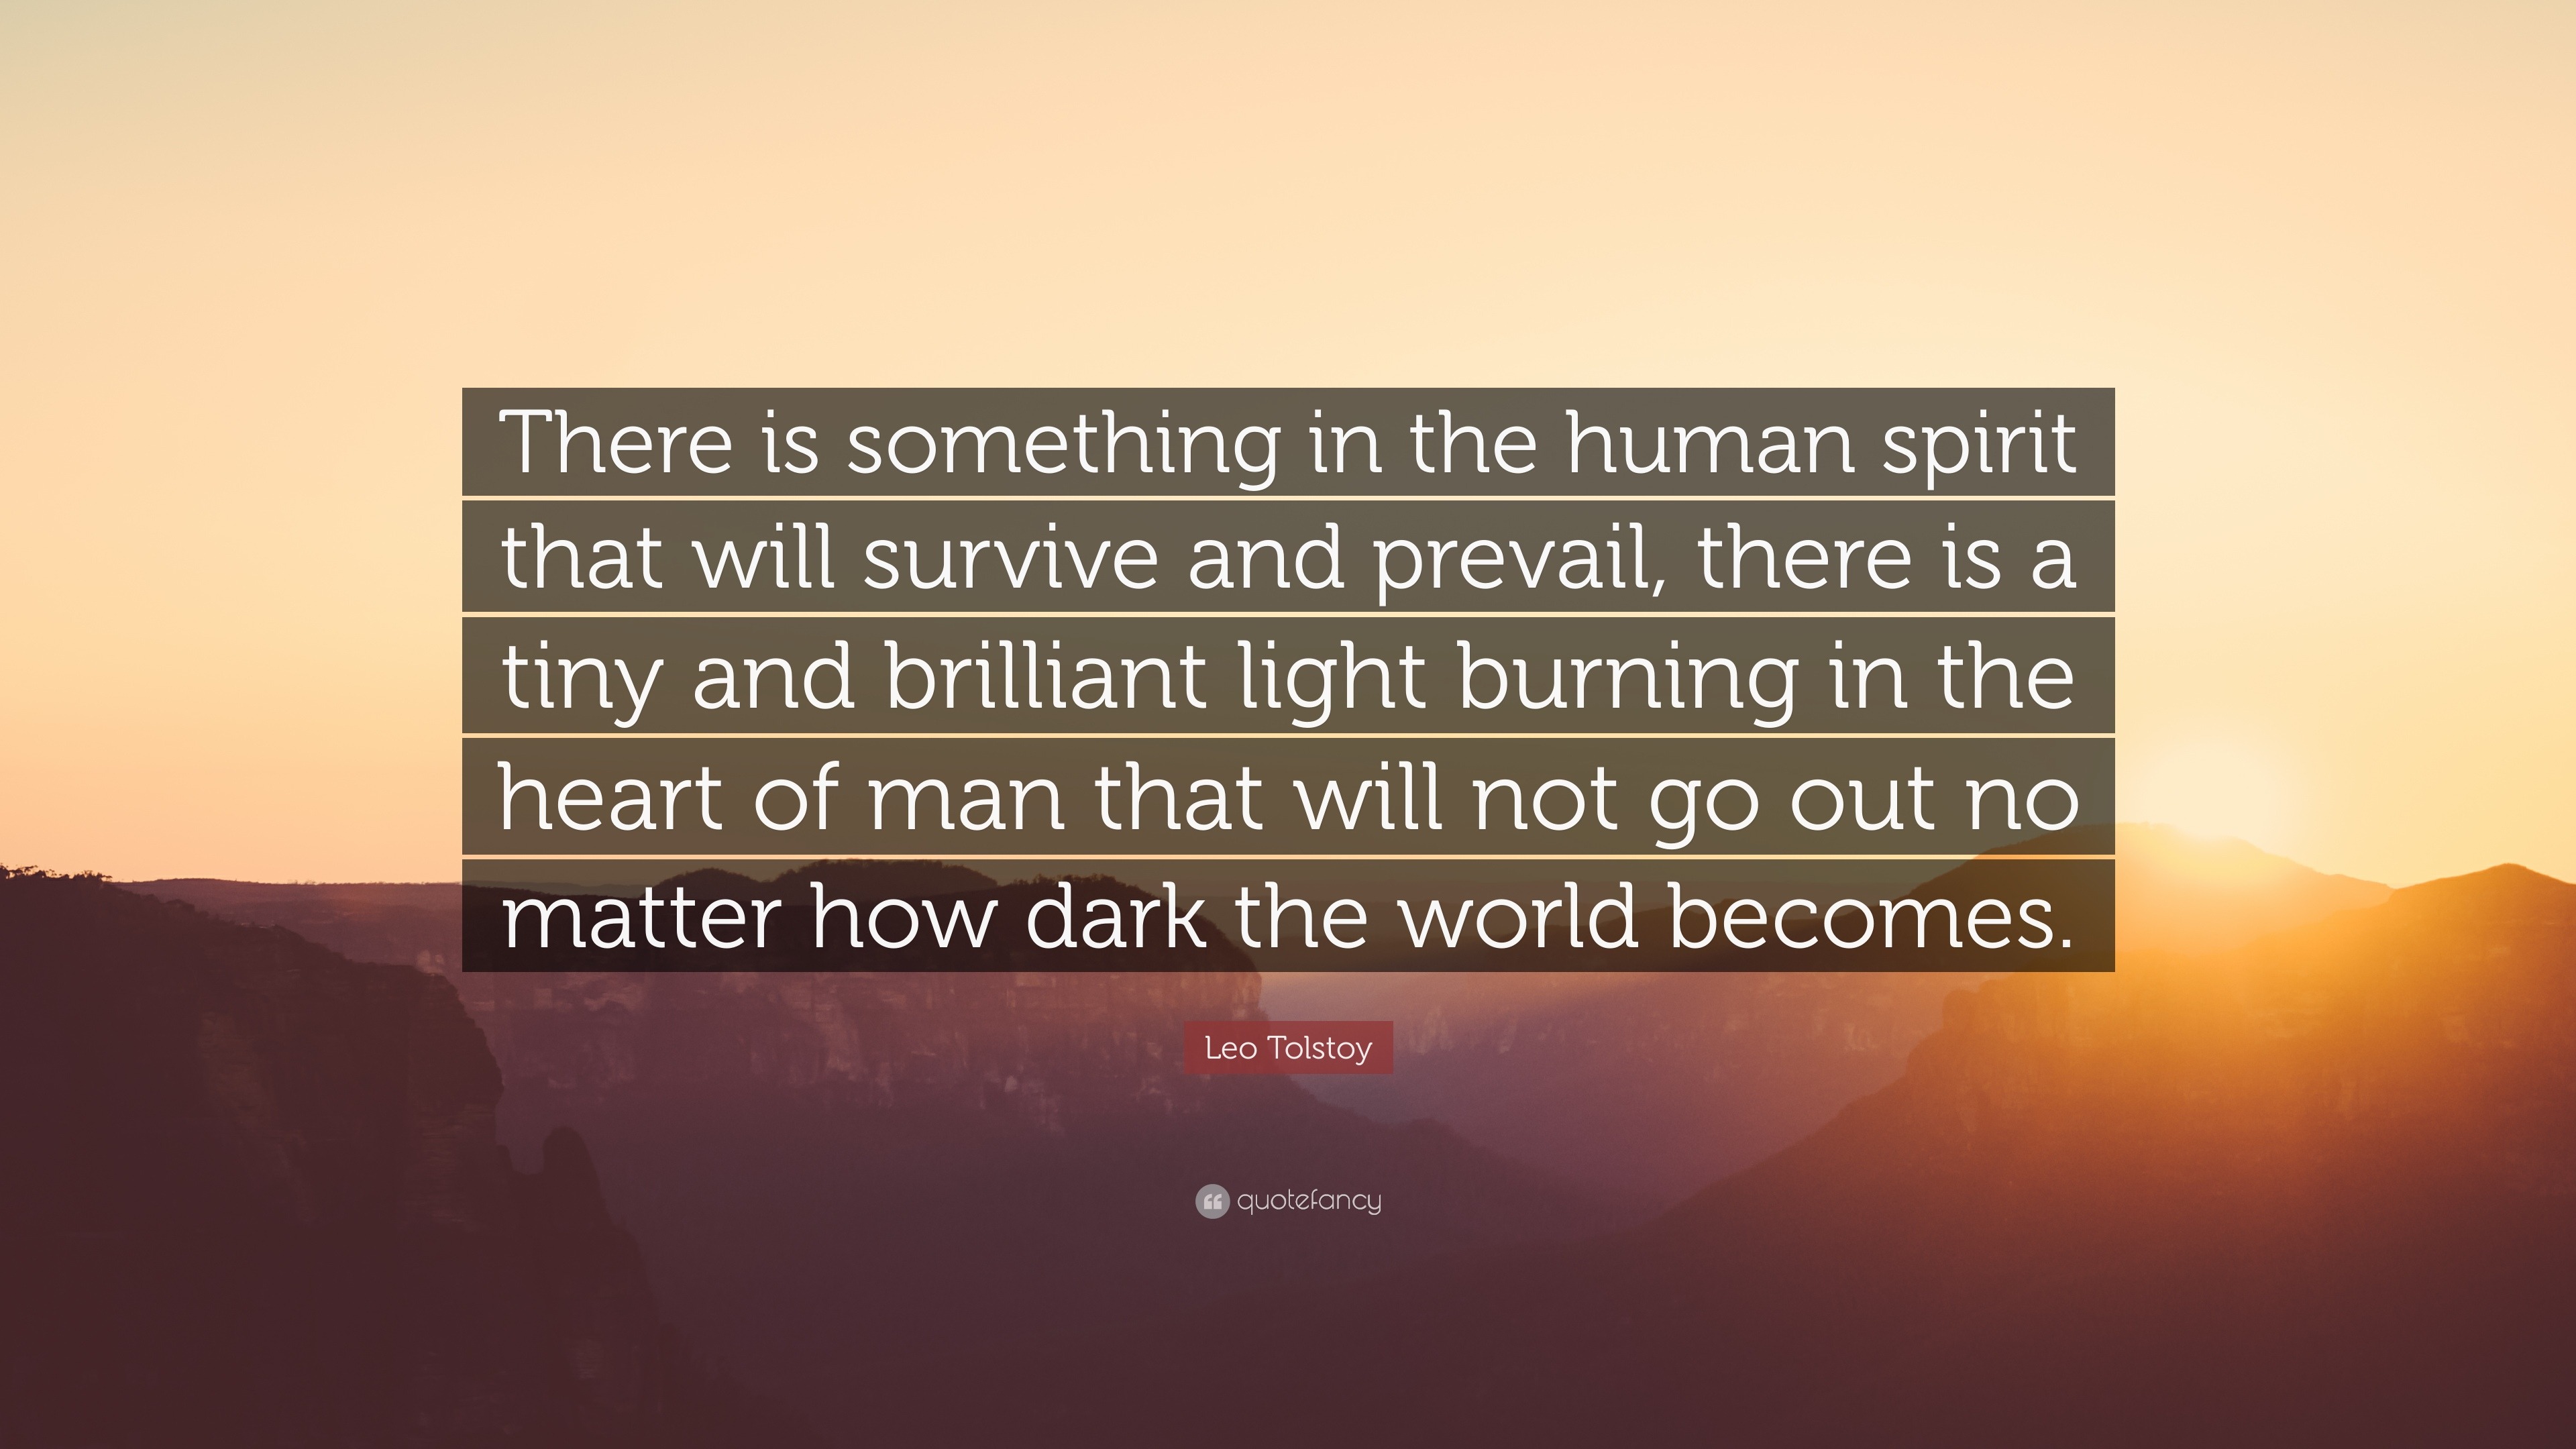 Leo Tolstoy Quote: “There is something in the human spirit that will ...